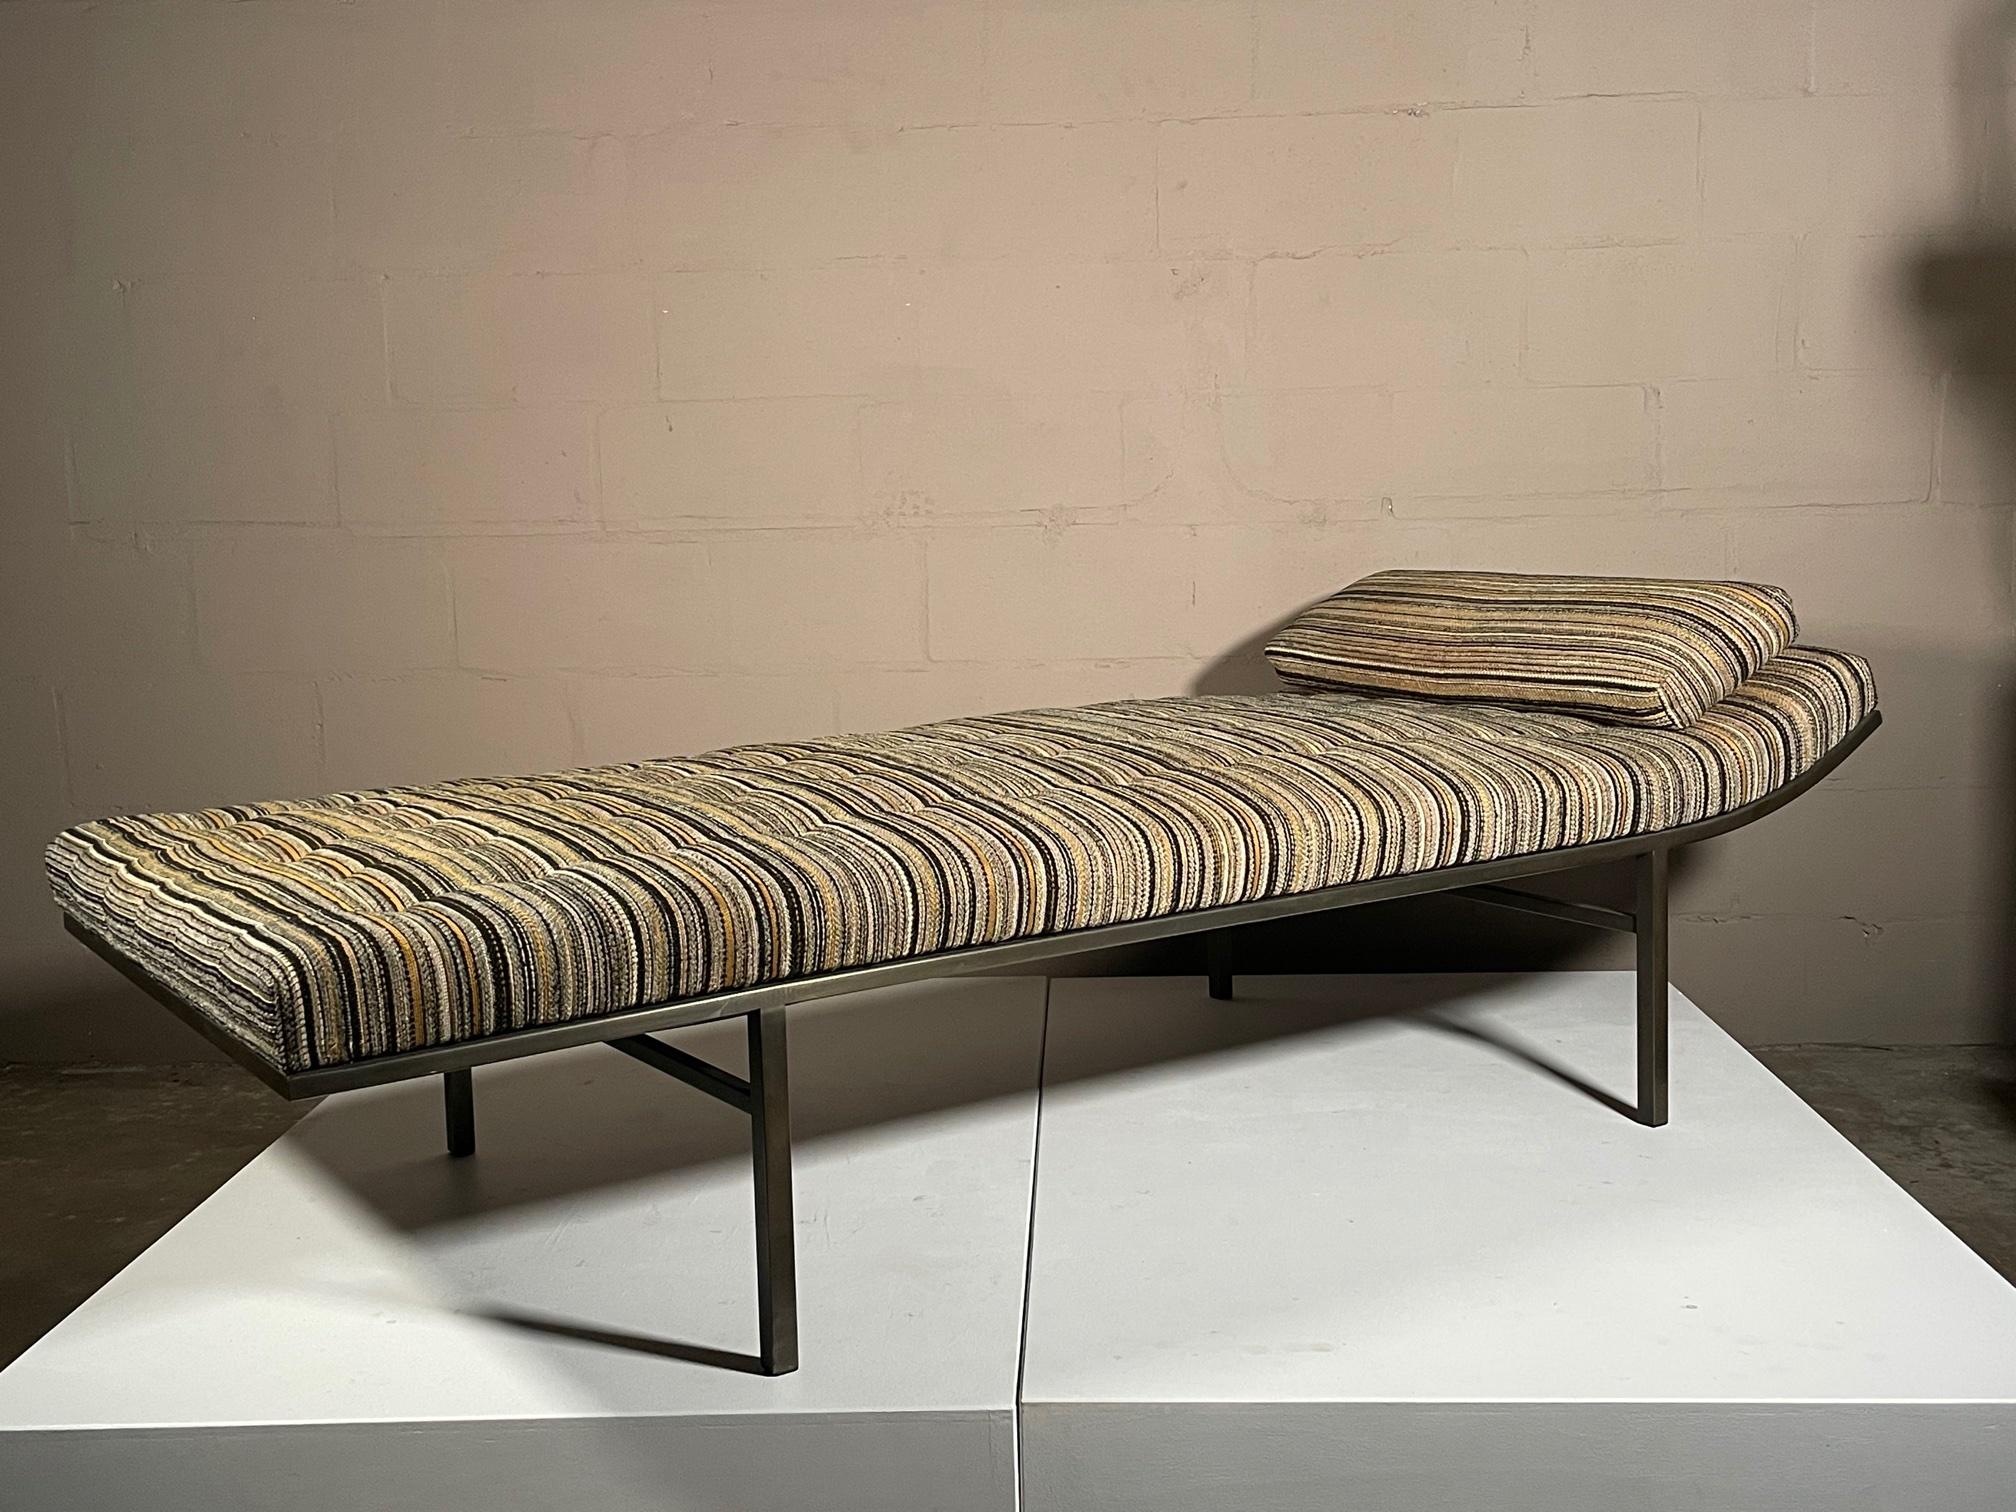 A rare and unusual chaise or daybed by Jules Heumann for Metropolitan Furniture of San Fransisco, with original upholstery and bronze finished frame, circa 1970s.